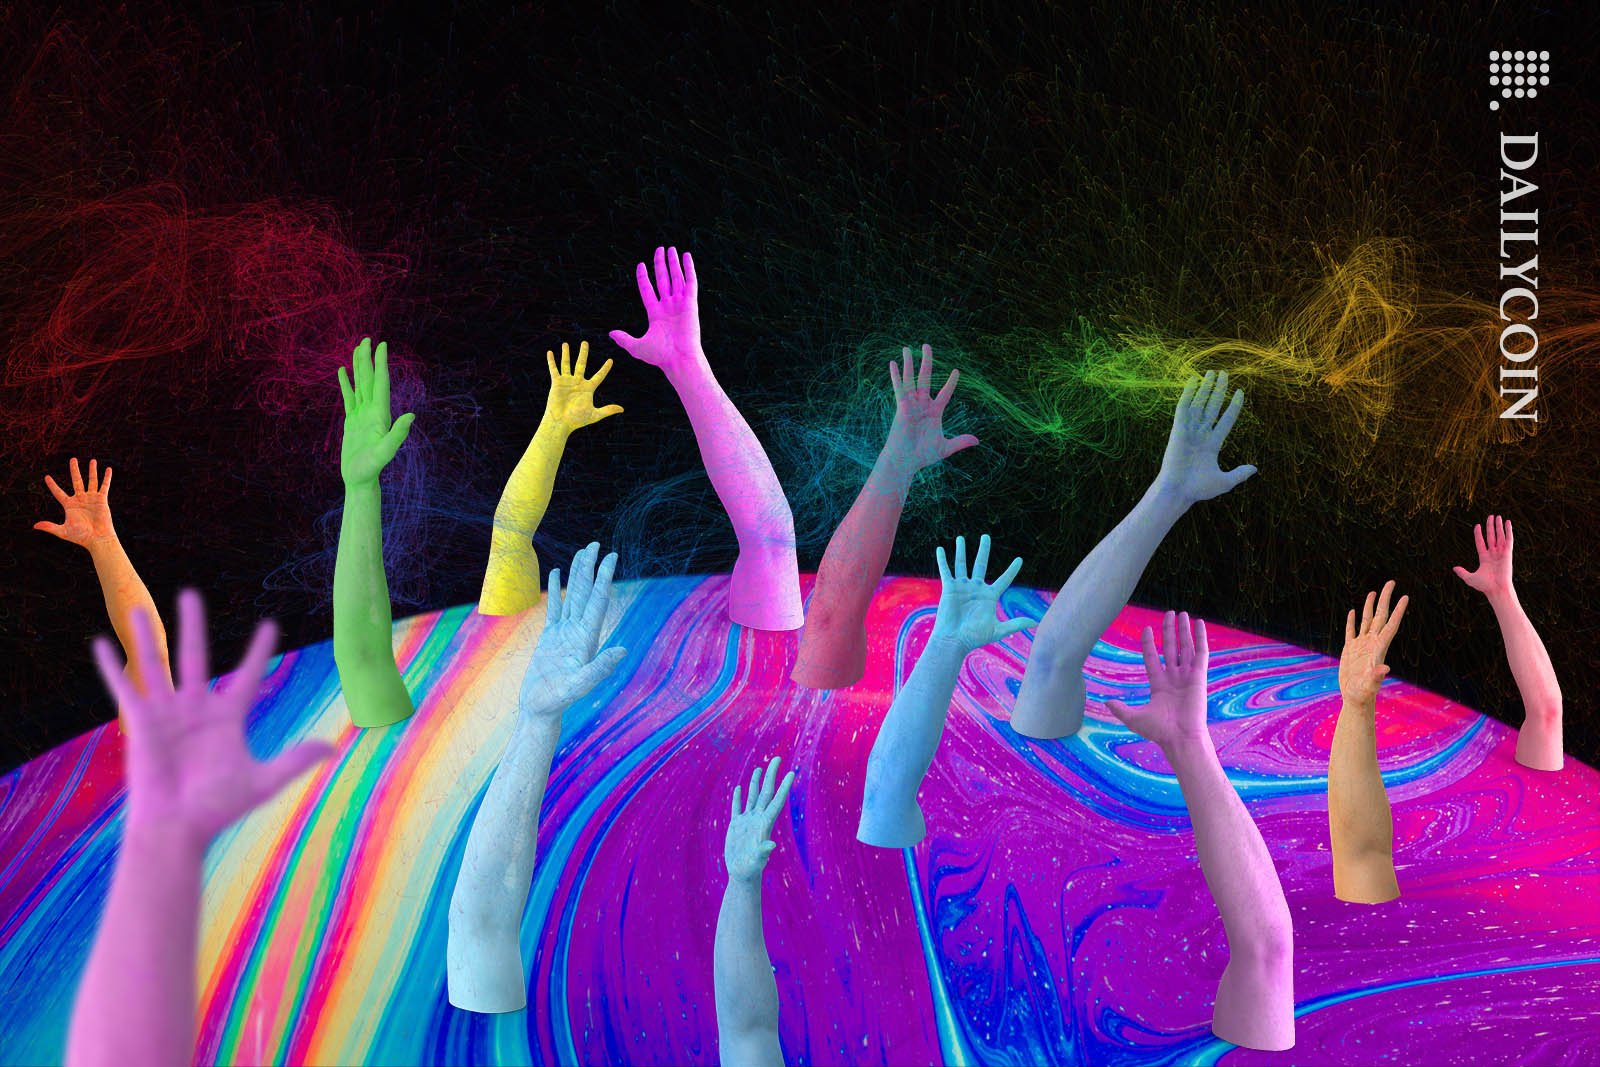 Lots of colourful hands reaching out to catch some colourful particles in the air.